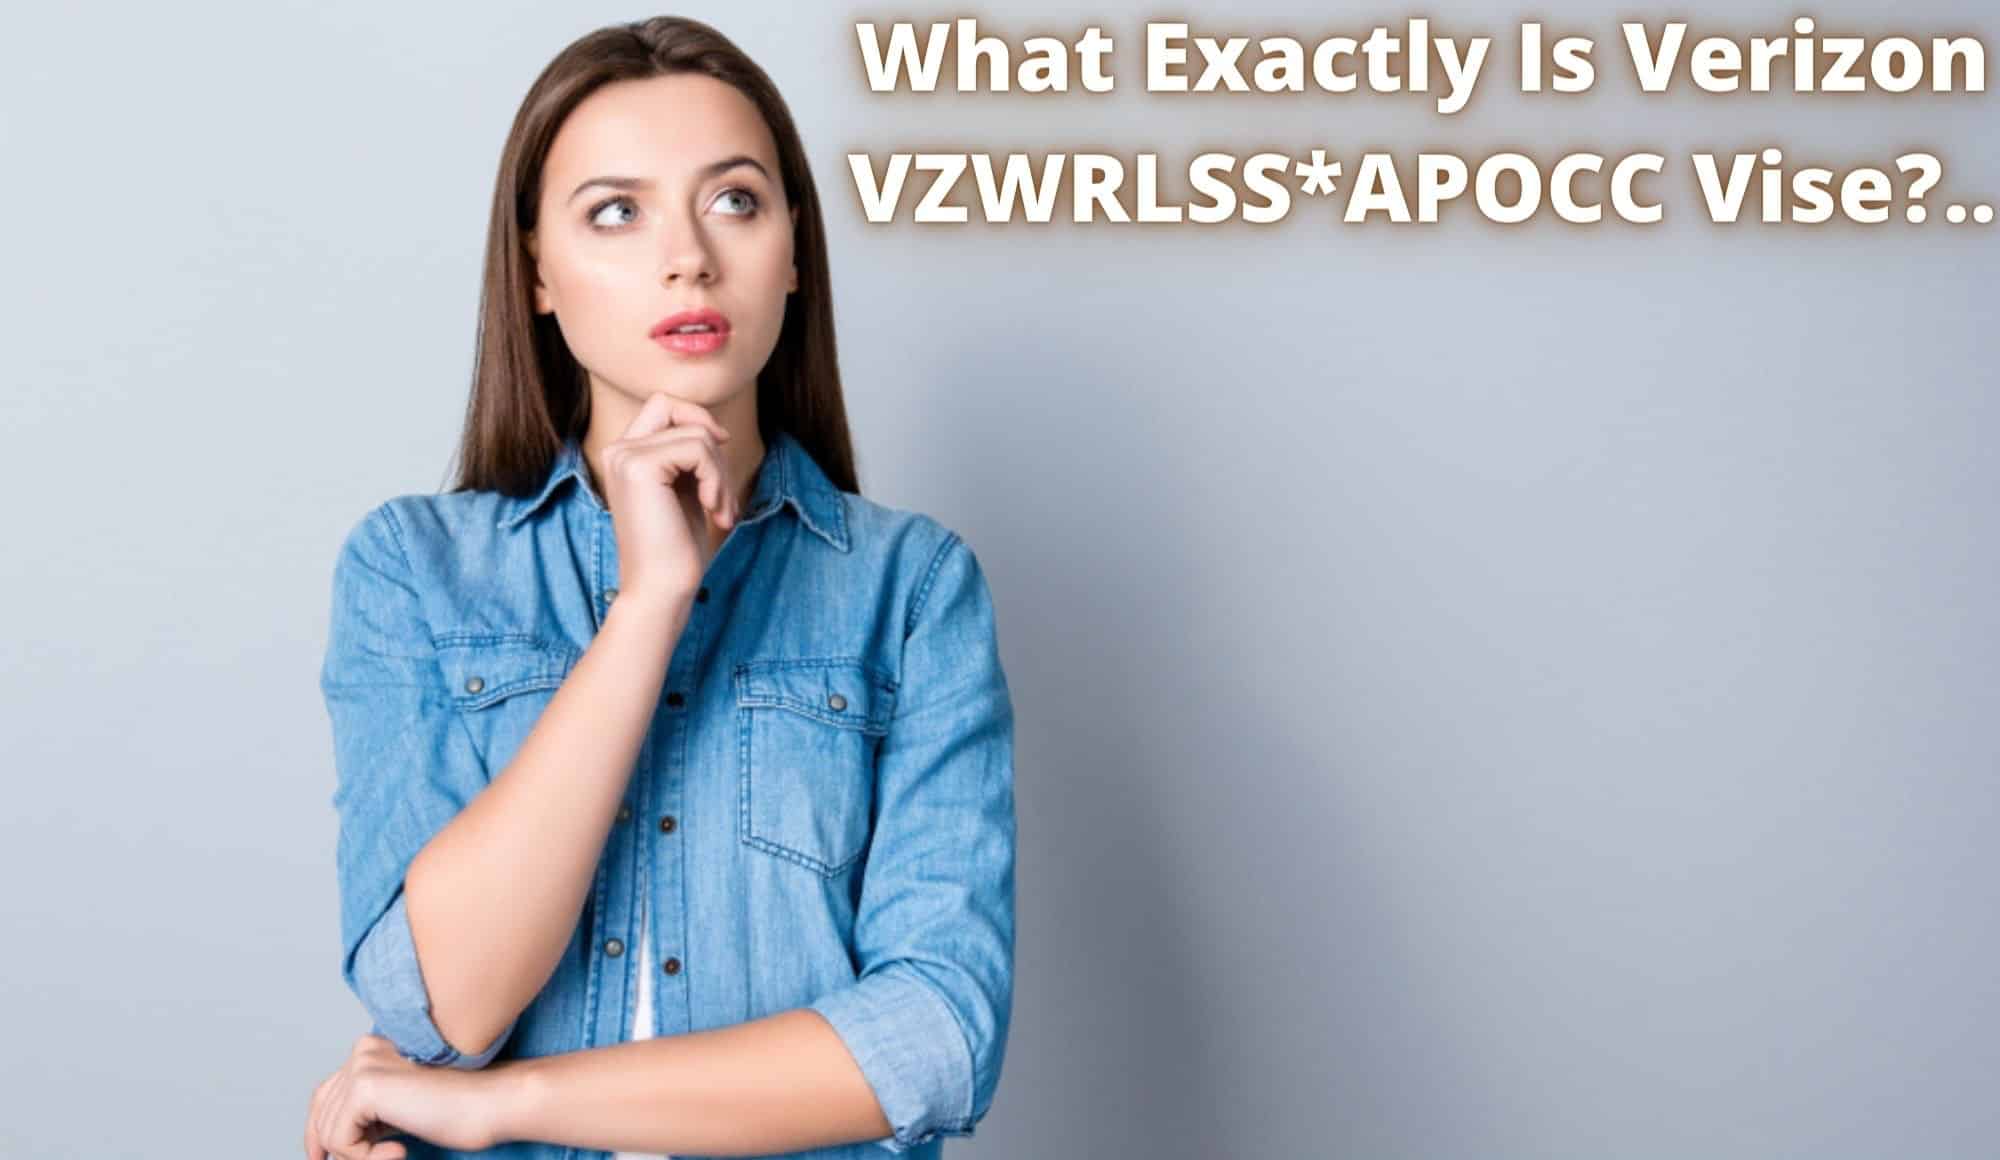 What Exactly Is Verizon VZWRLSS*APOCC Vise